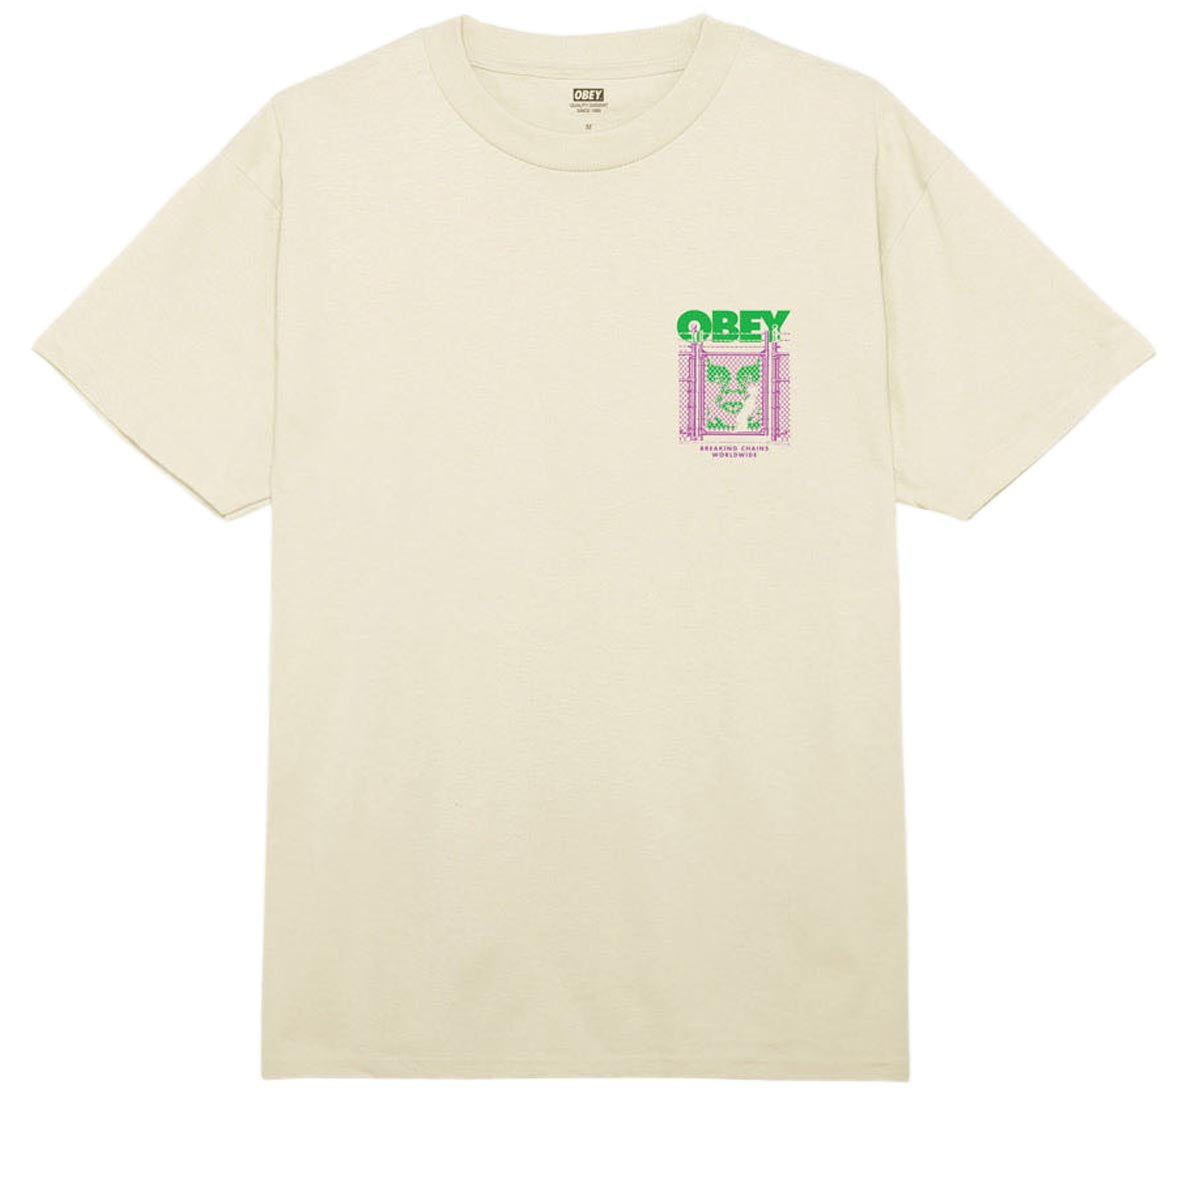 Obey Chain Link Fence Icon T-Shirt - Cream image 2